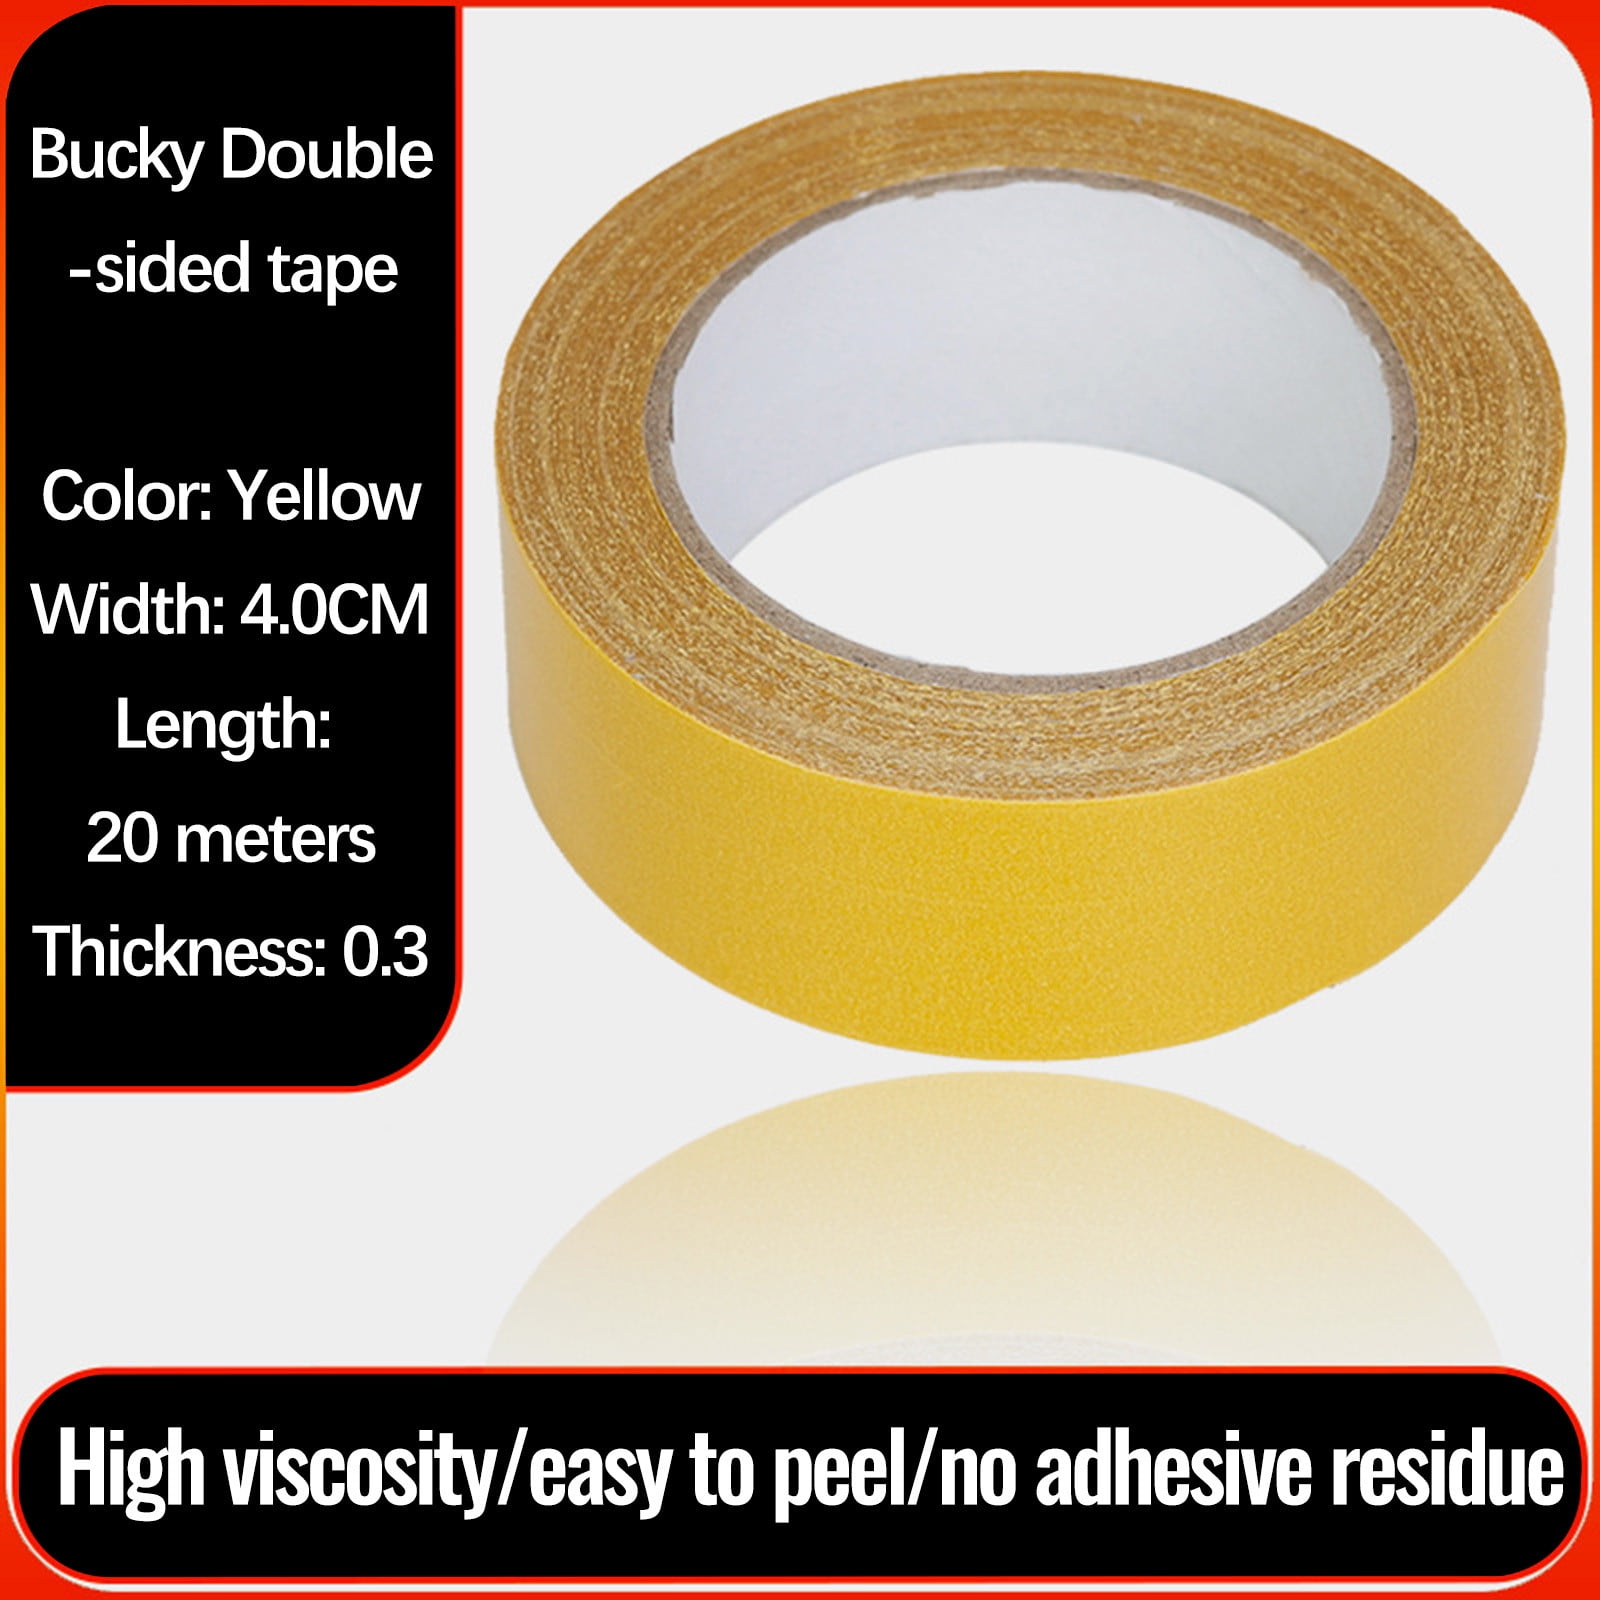 Canopus 2 inch by 30 Yards Double Sided Carpet Tape for Area Rugs Non-Slip Rug Tape